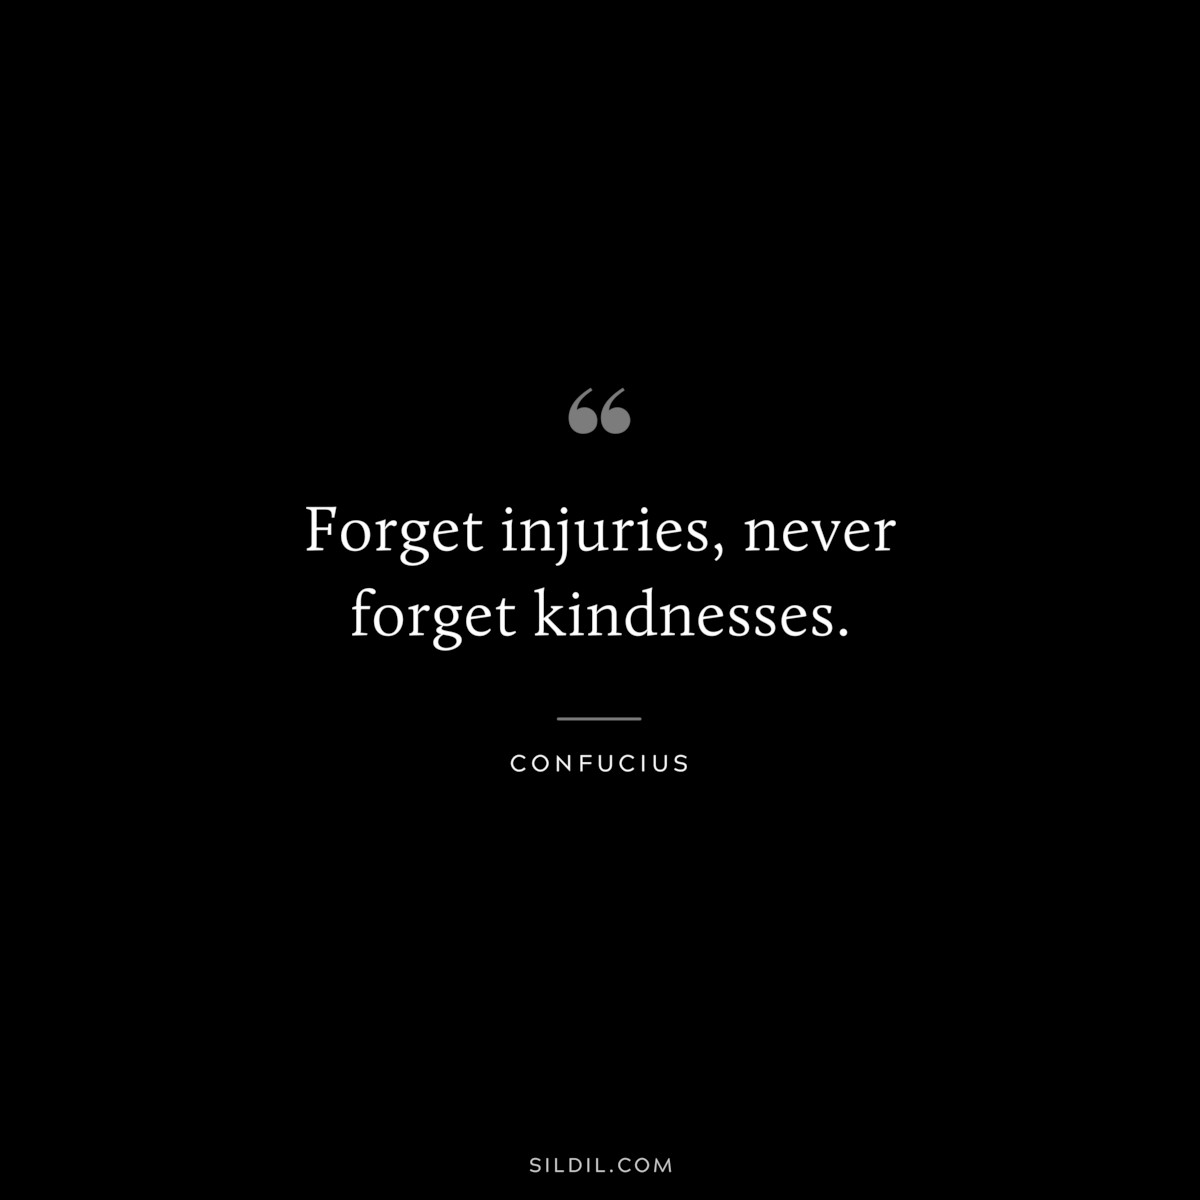 Forget injuries, never forget kindnesses. ― Confucius